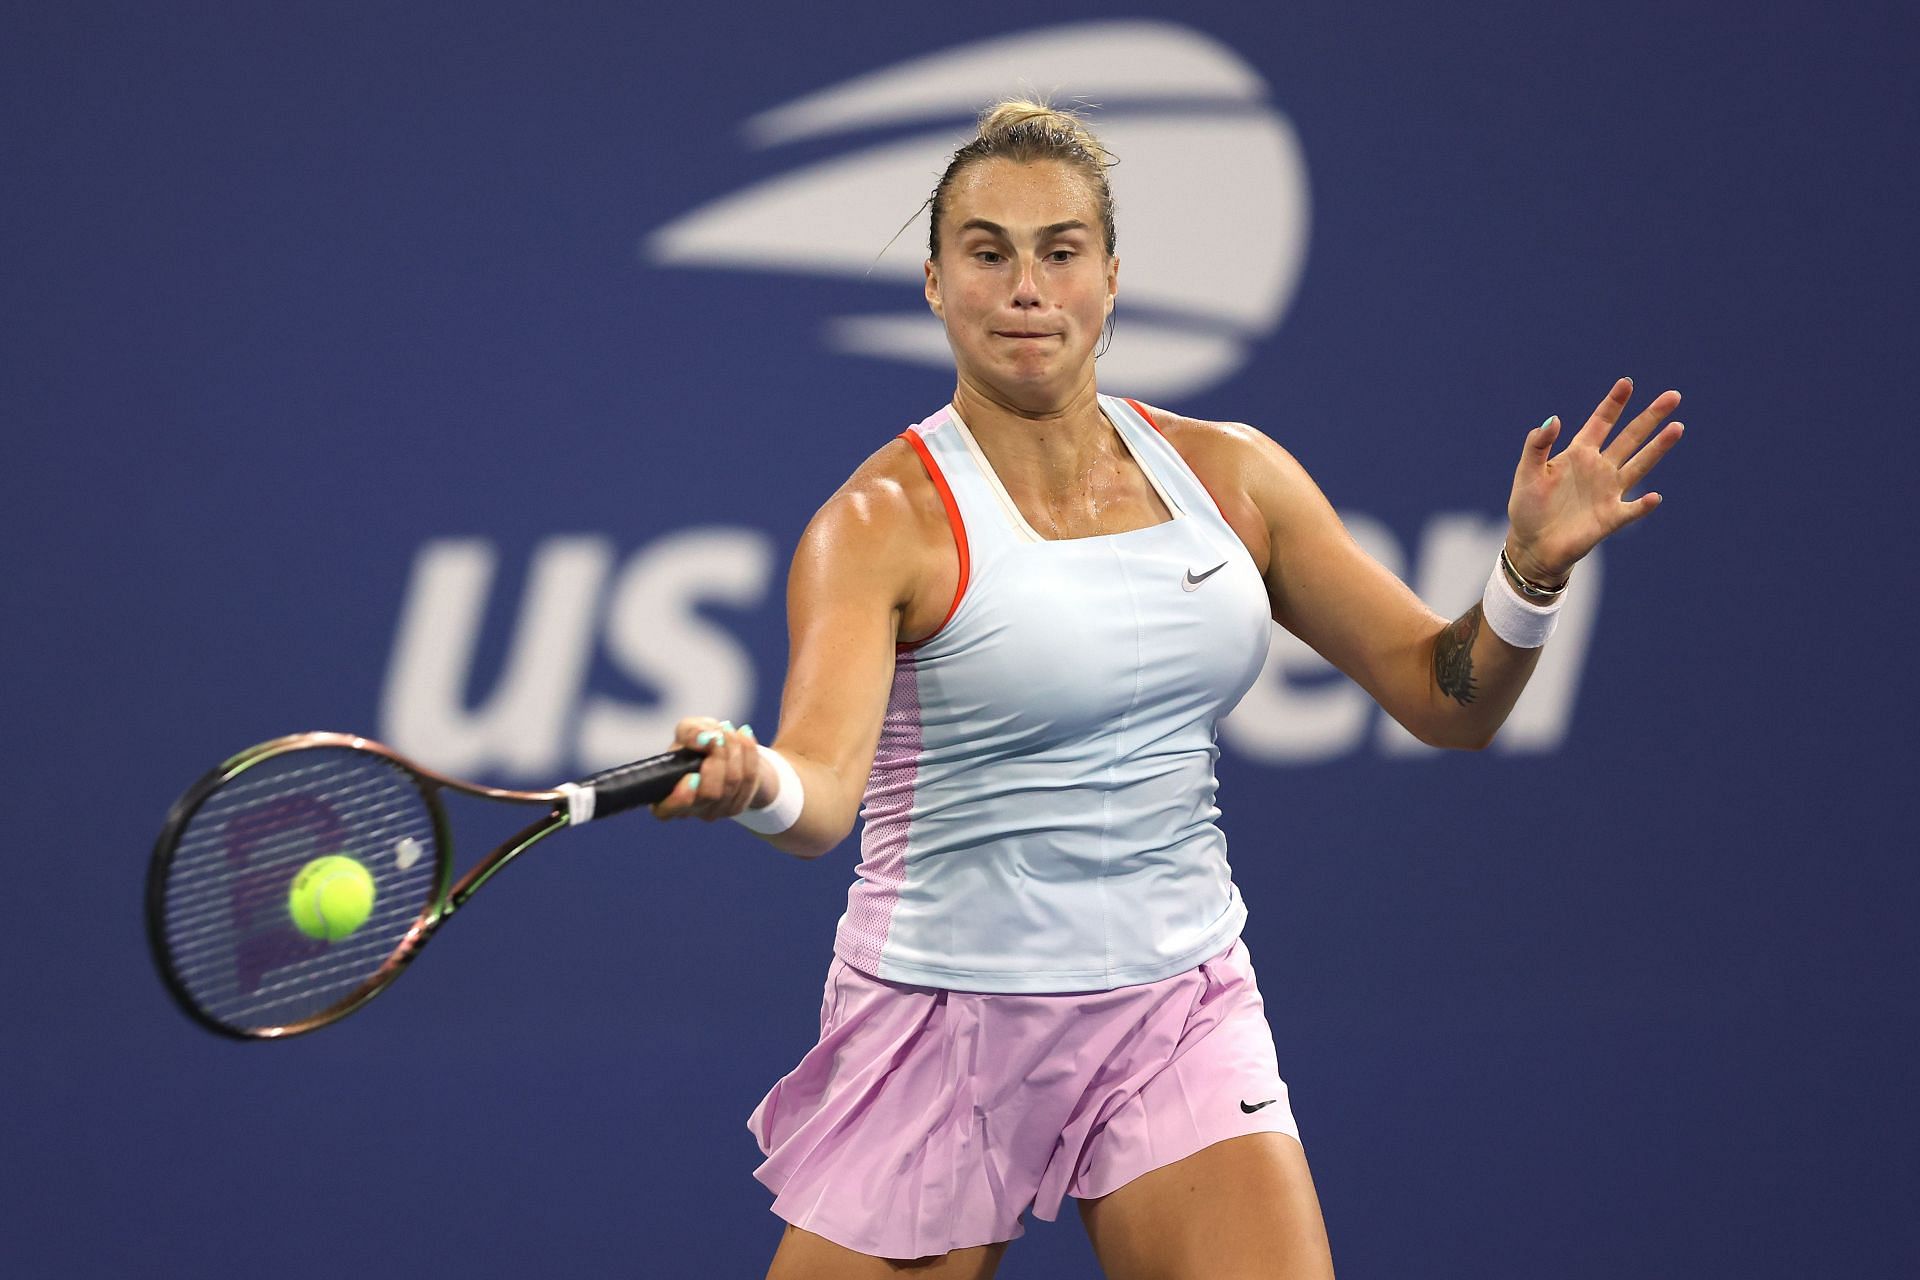 Aryna Sabalenka in action at the 2022 US Open.